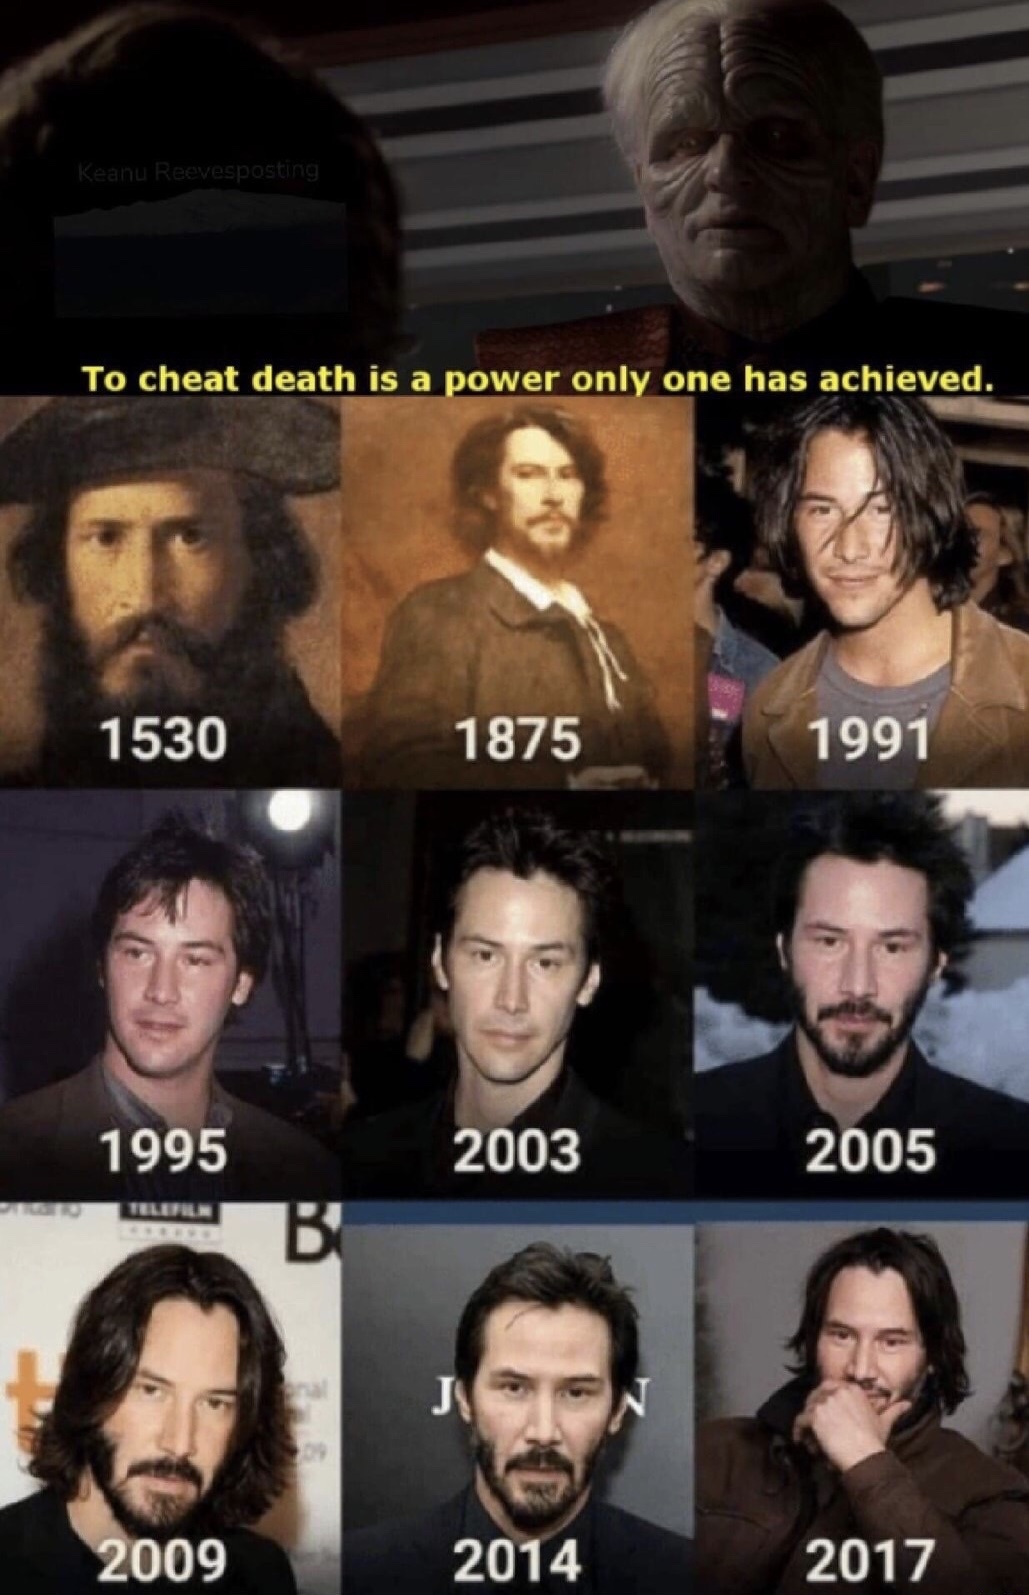 meme Keanu Reevesposting To cheat death is a power only one has achieved. 1530 1875 1991 1995 2003 2005 2009 2014 2017